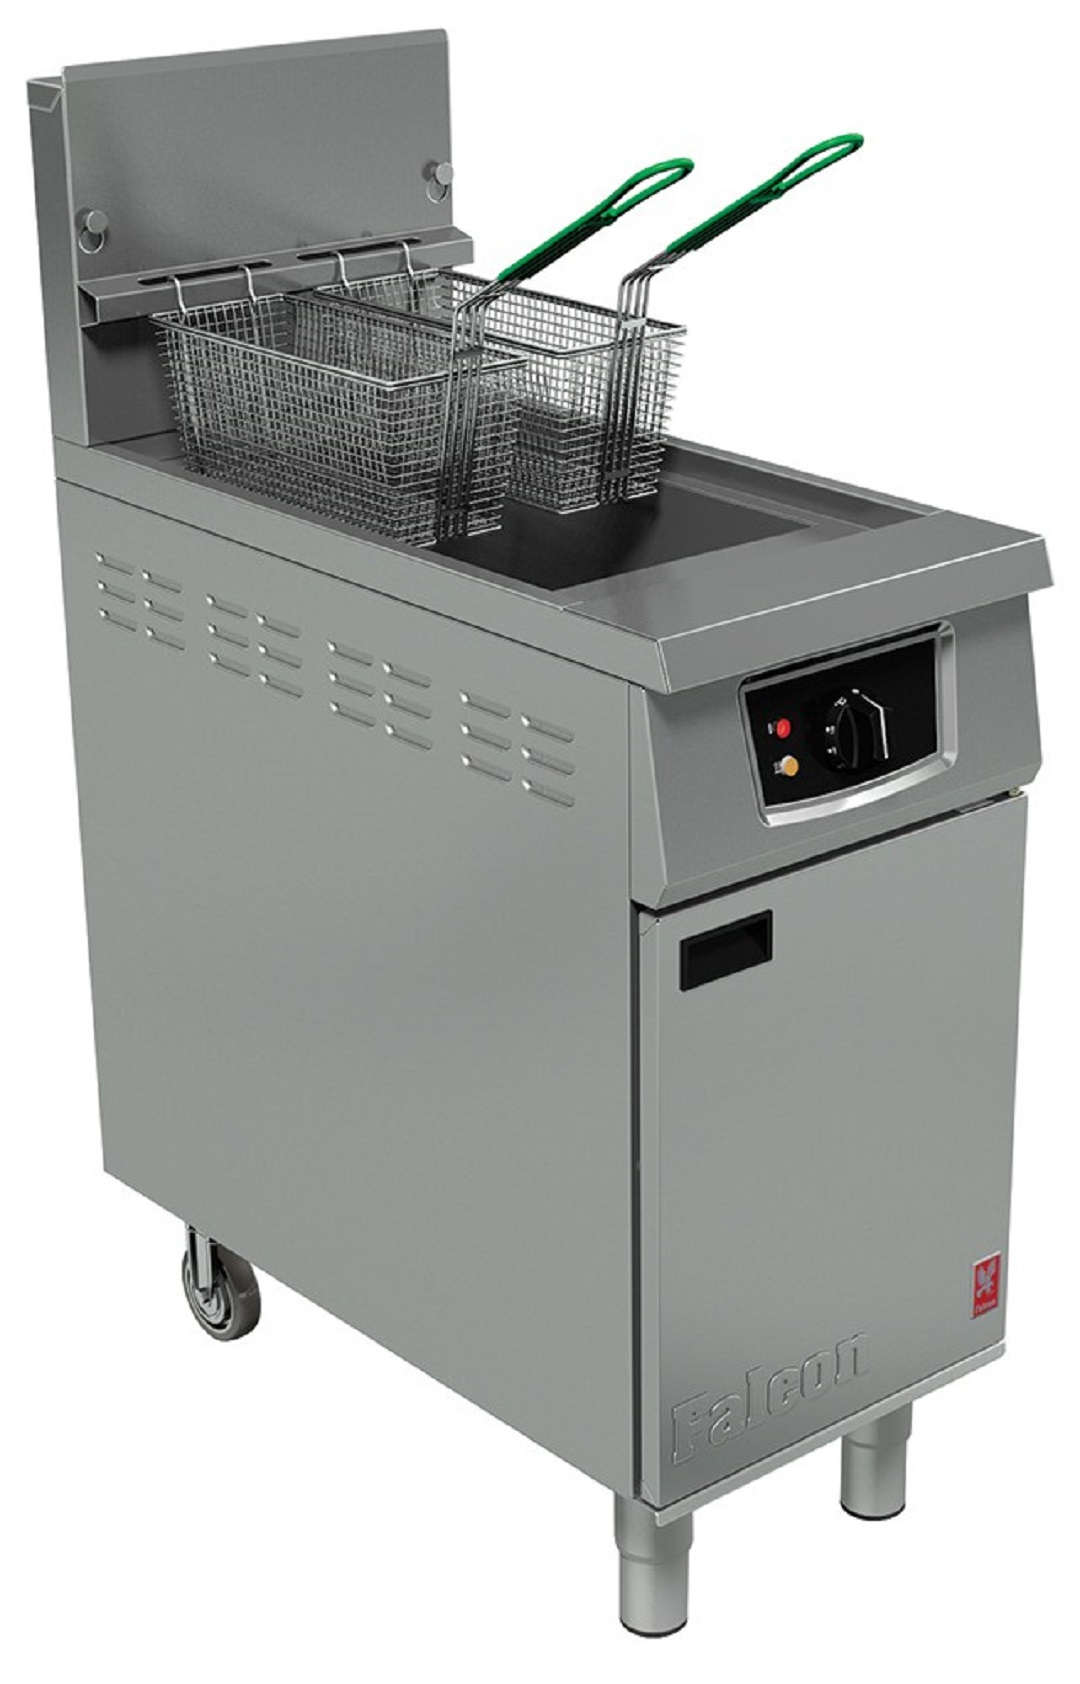 Falcon 400 Series G401F Fryer with filtration